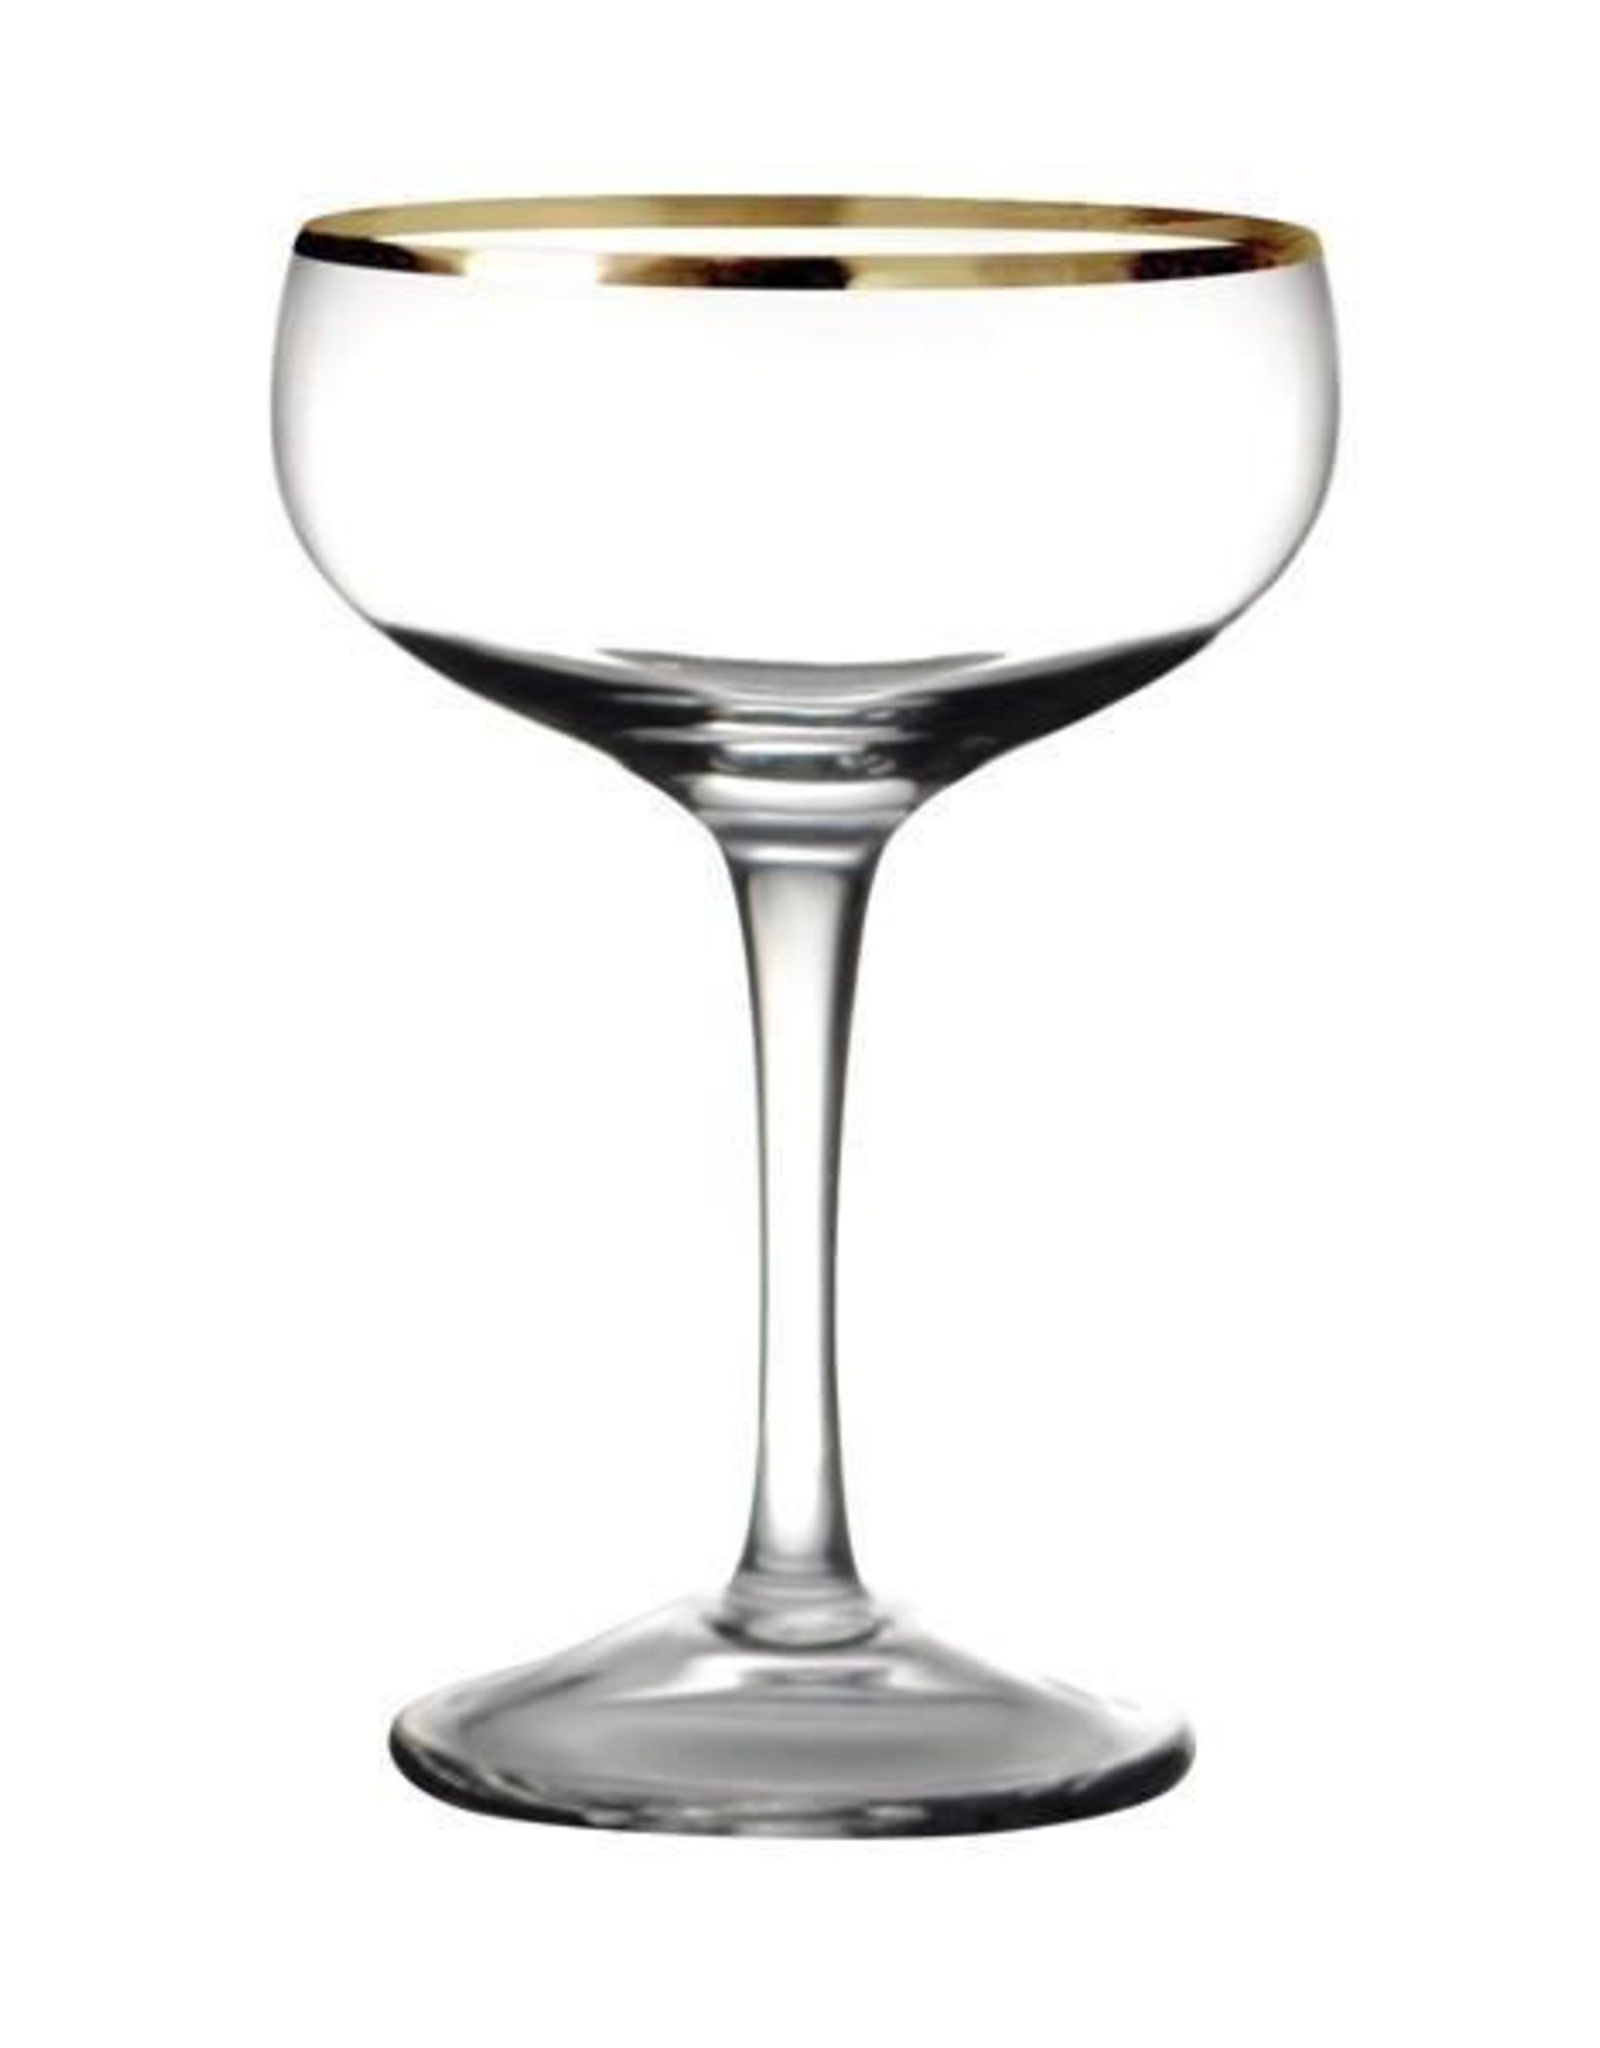 Antoinette Cocktail Coupe with Gold Rim 6oz